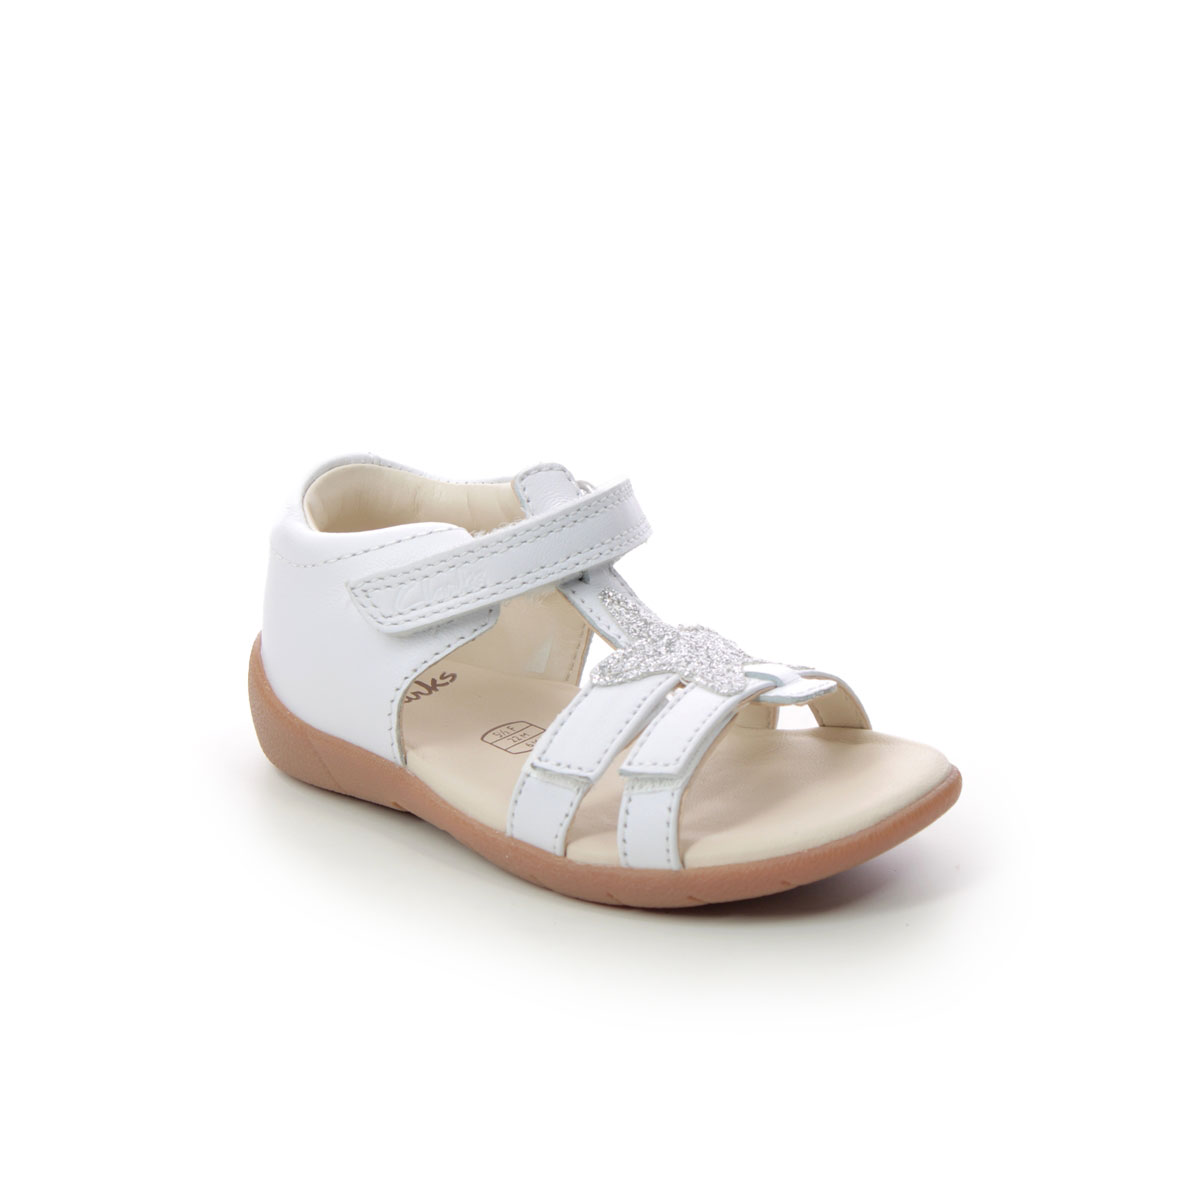 Clarks Zora Summer T White Leather Kids Sandals 566436F In Size 5 In Plain White Leather F Width Fitting Regular Fit For kids